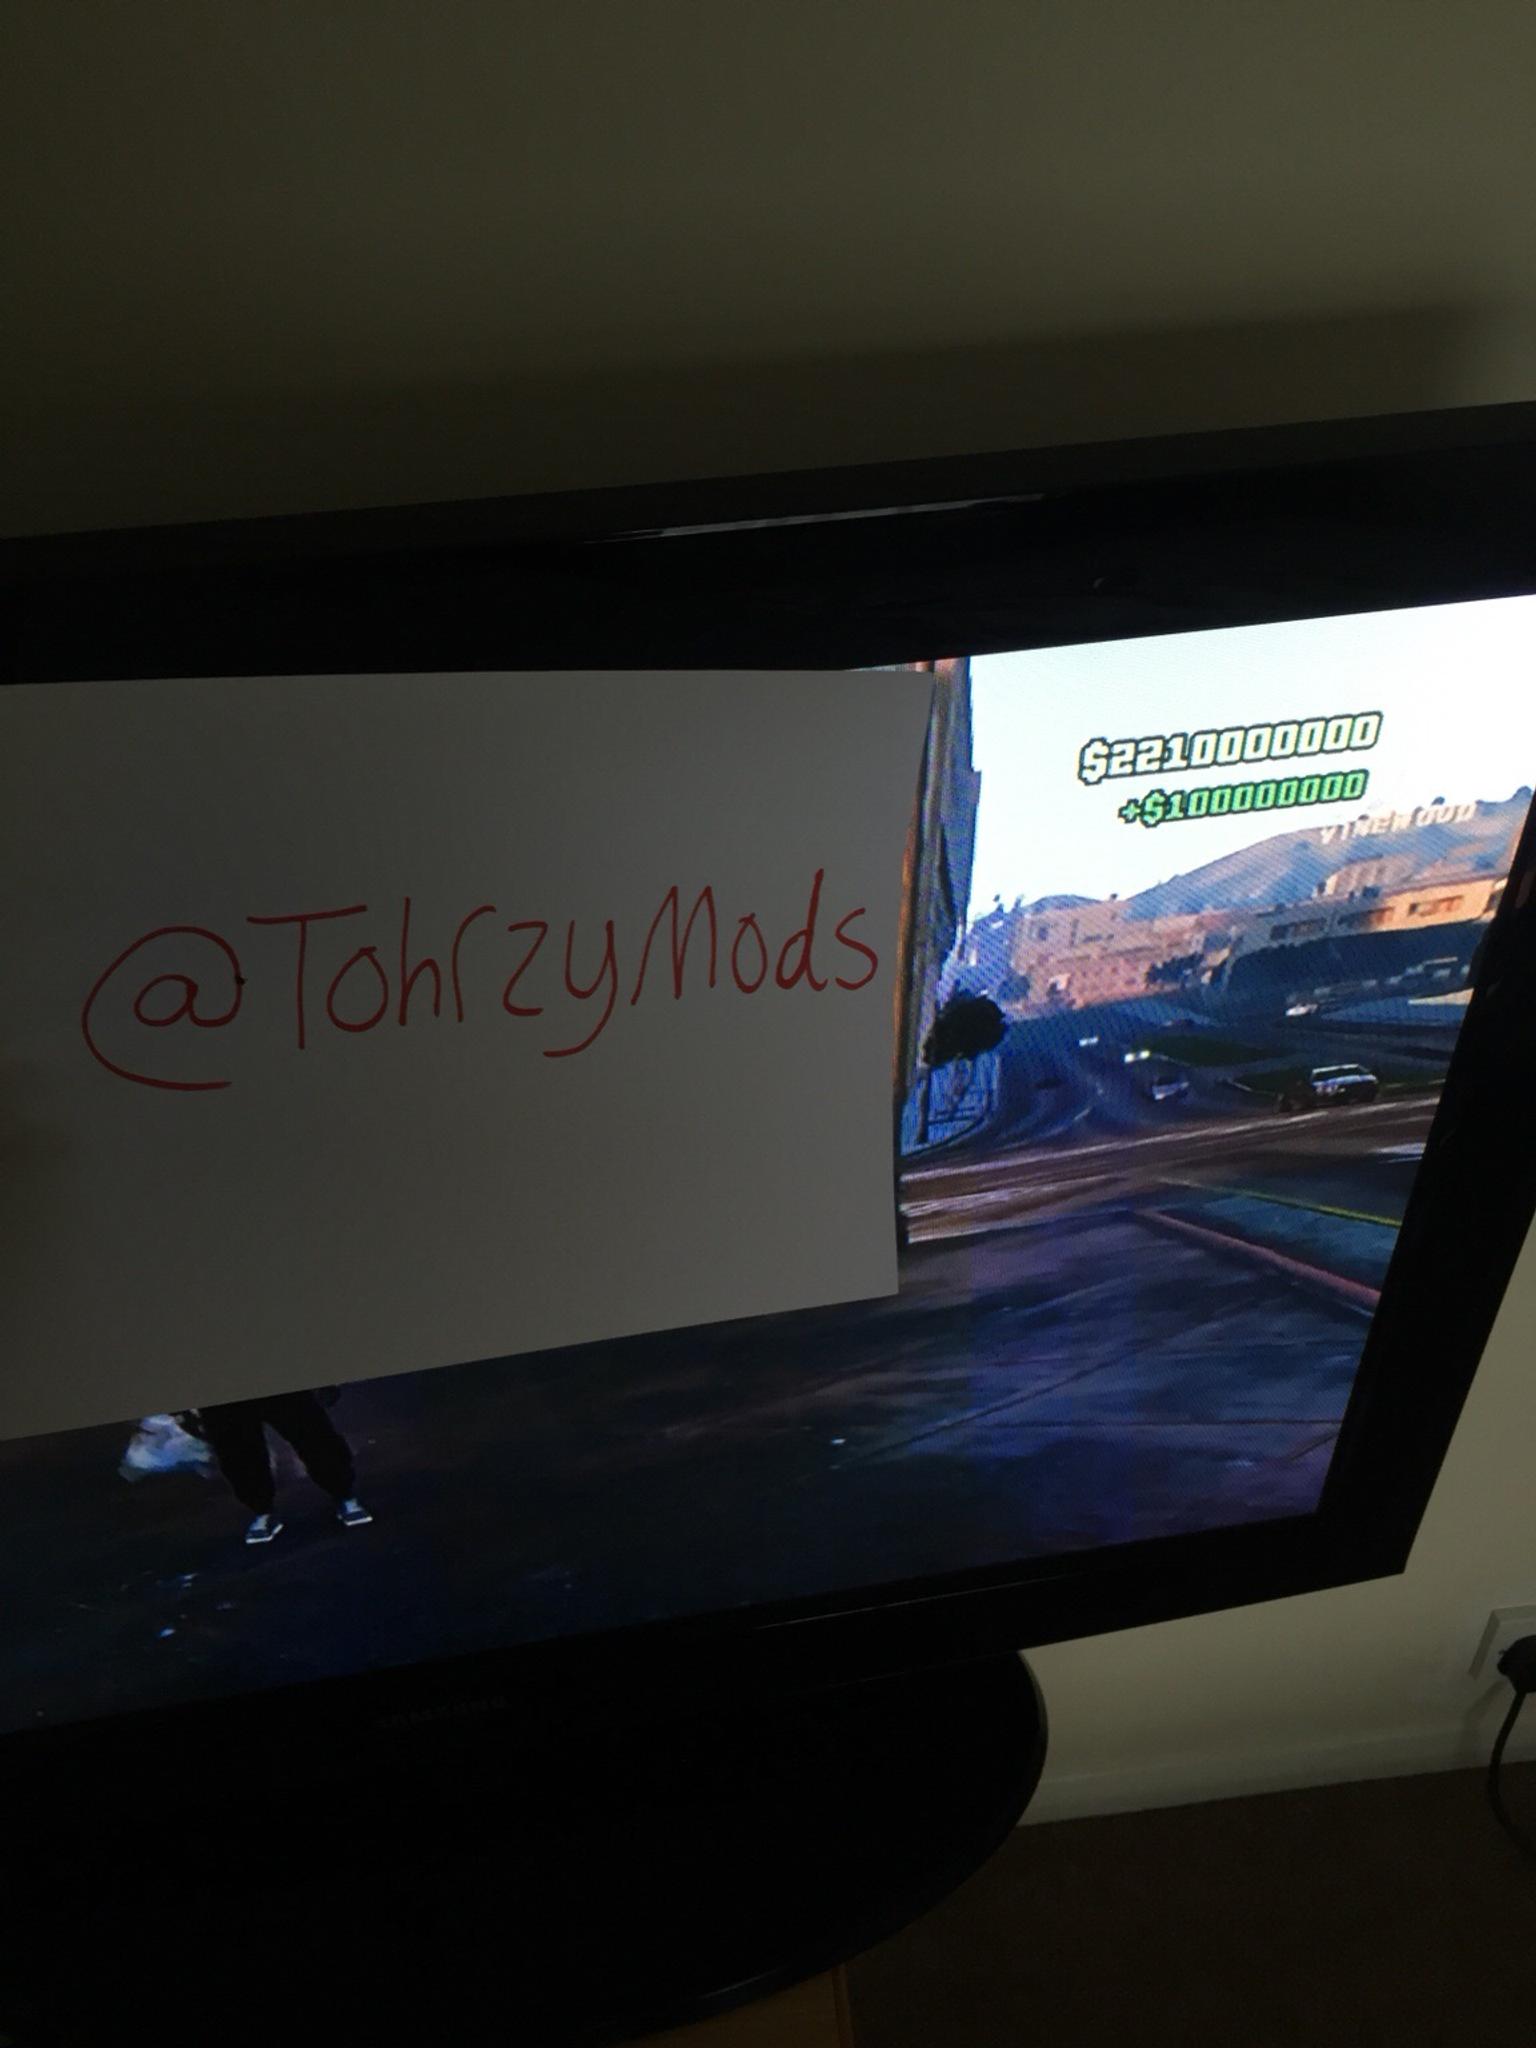 gta 5 modded accounts for sale xbox one